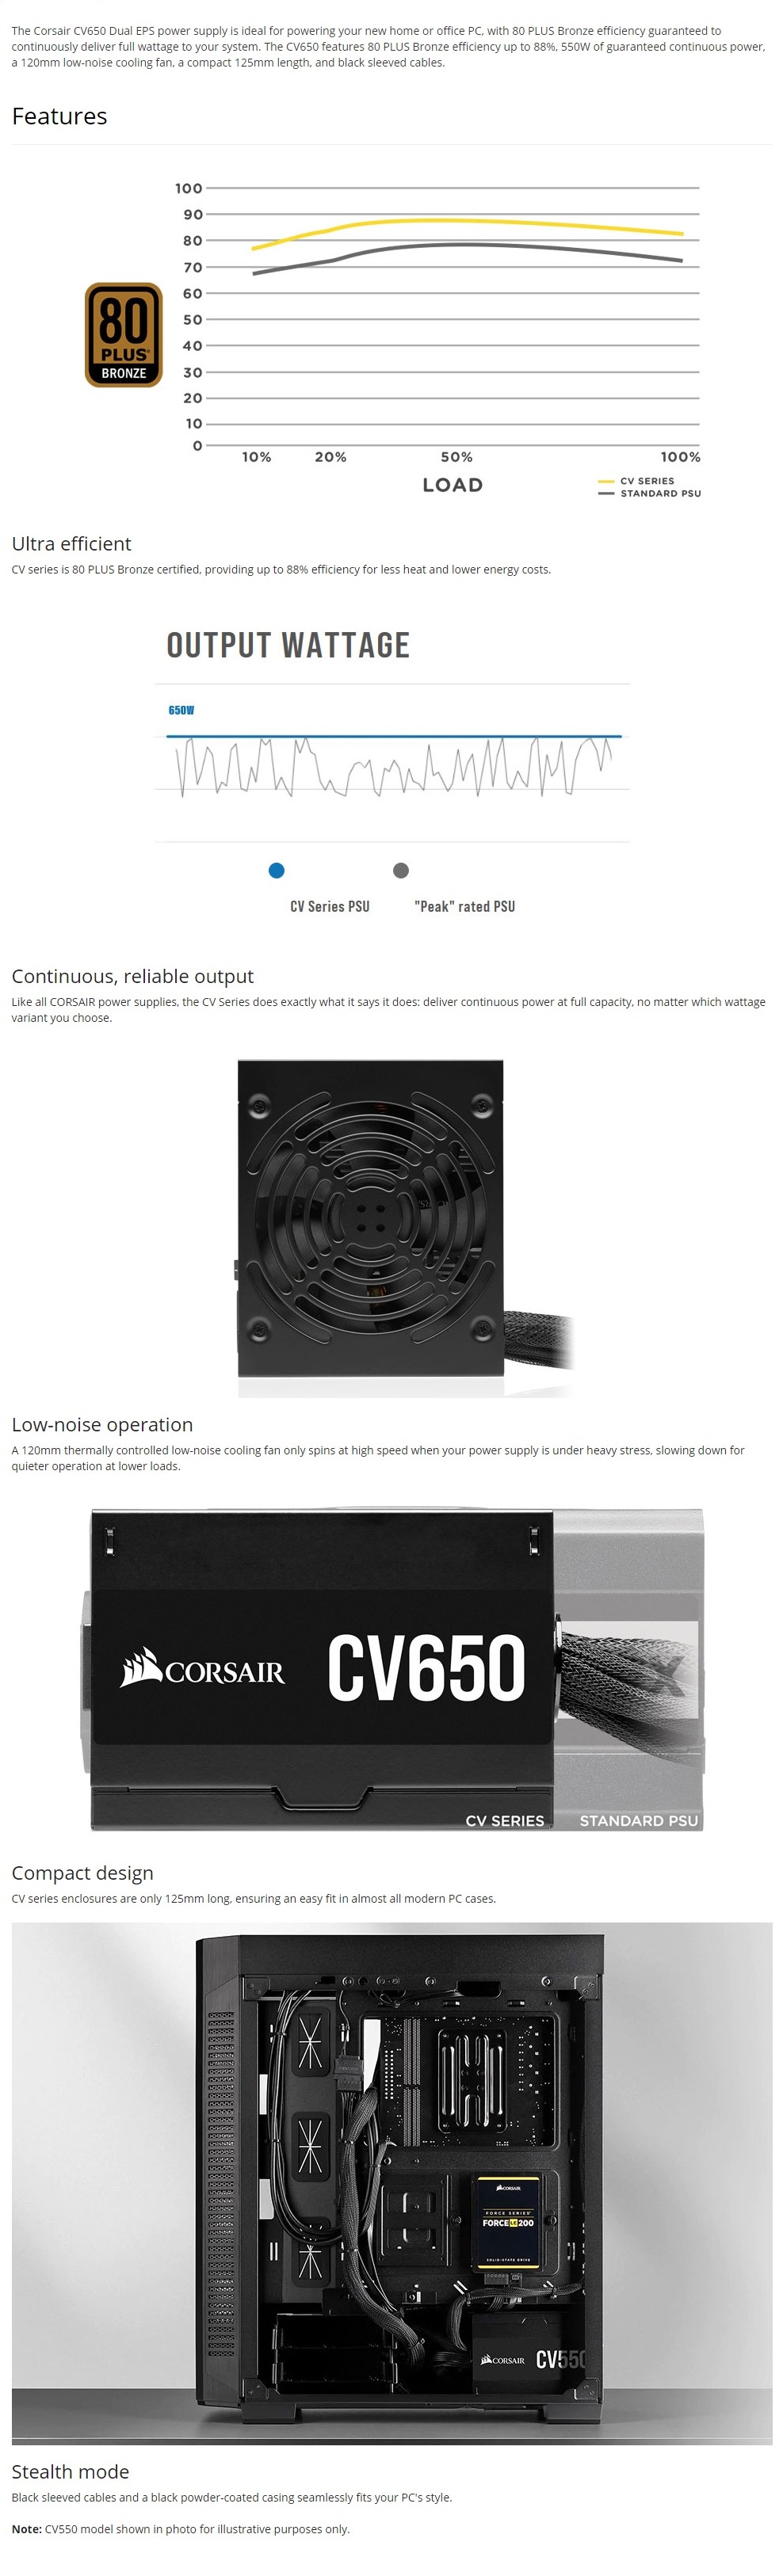 A large marketing image providing additional information about the product Corsair CV650 650W Bronze ATX PSU - Additional alt info not provided